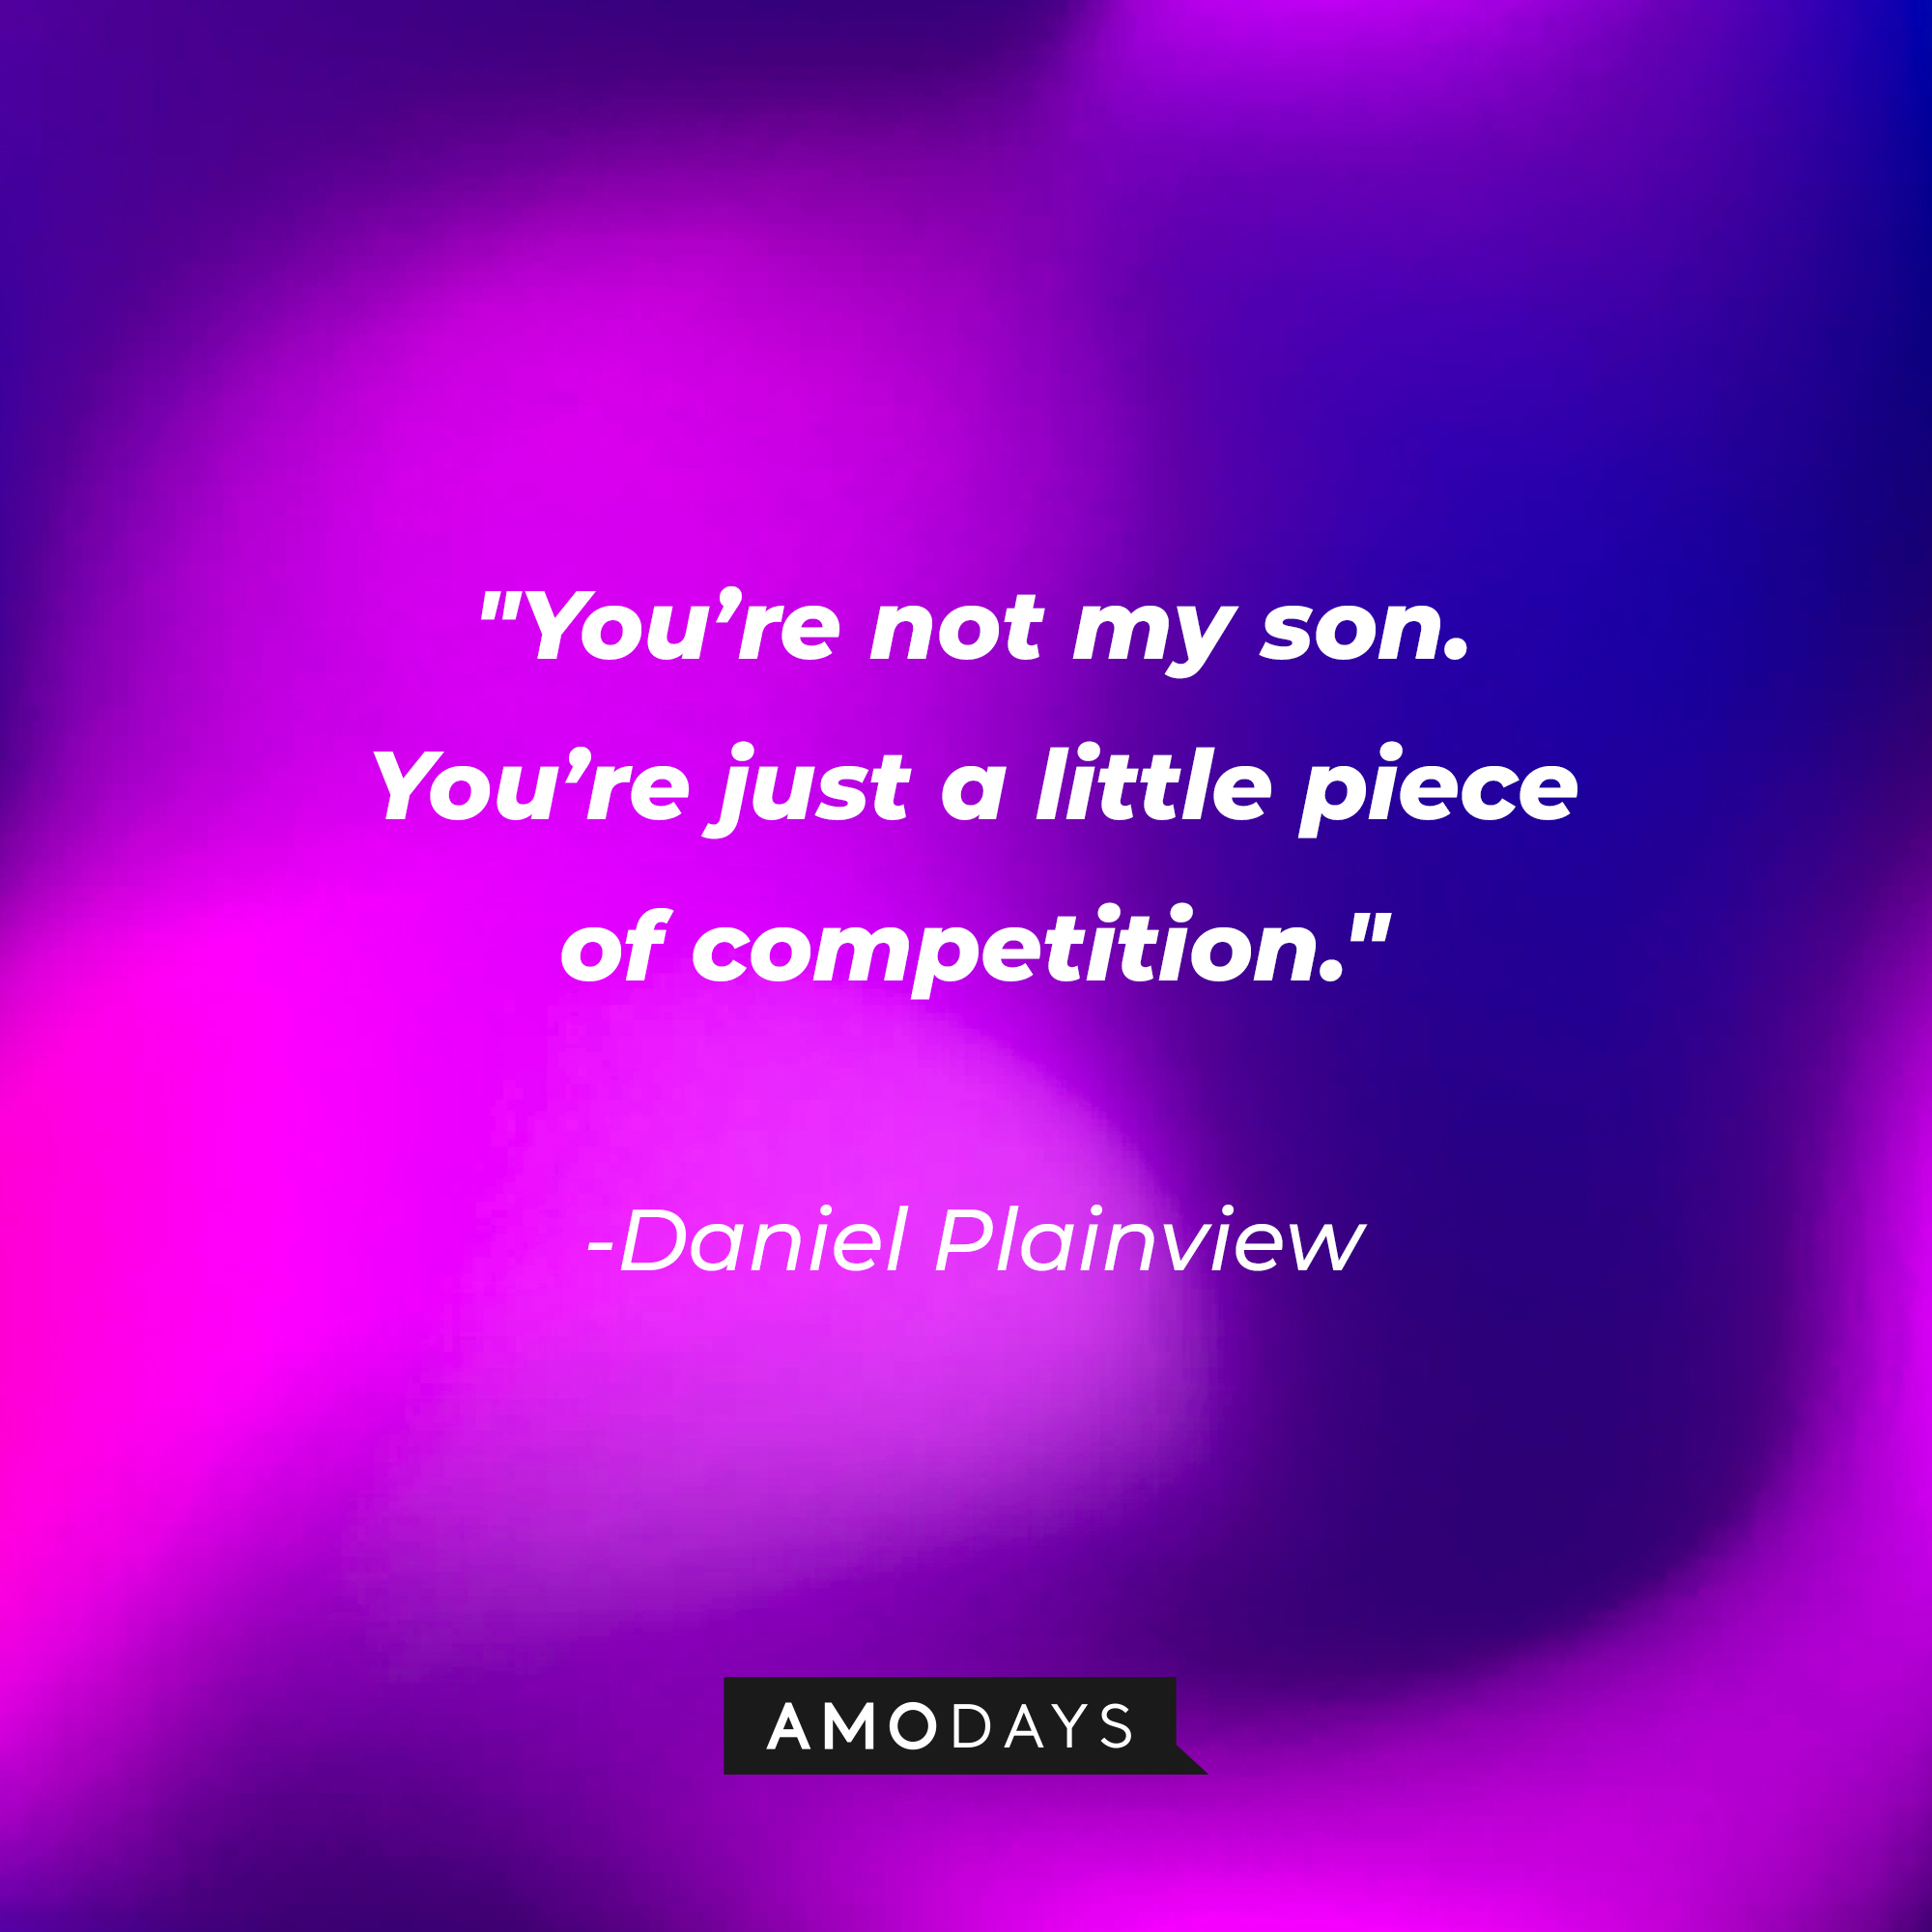 Daniel Plainview’s quote: “You’re not my son. You’re just a little piece of competition.” | Source: AmoDays